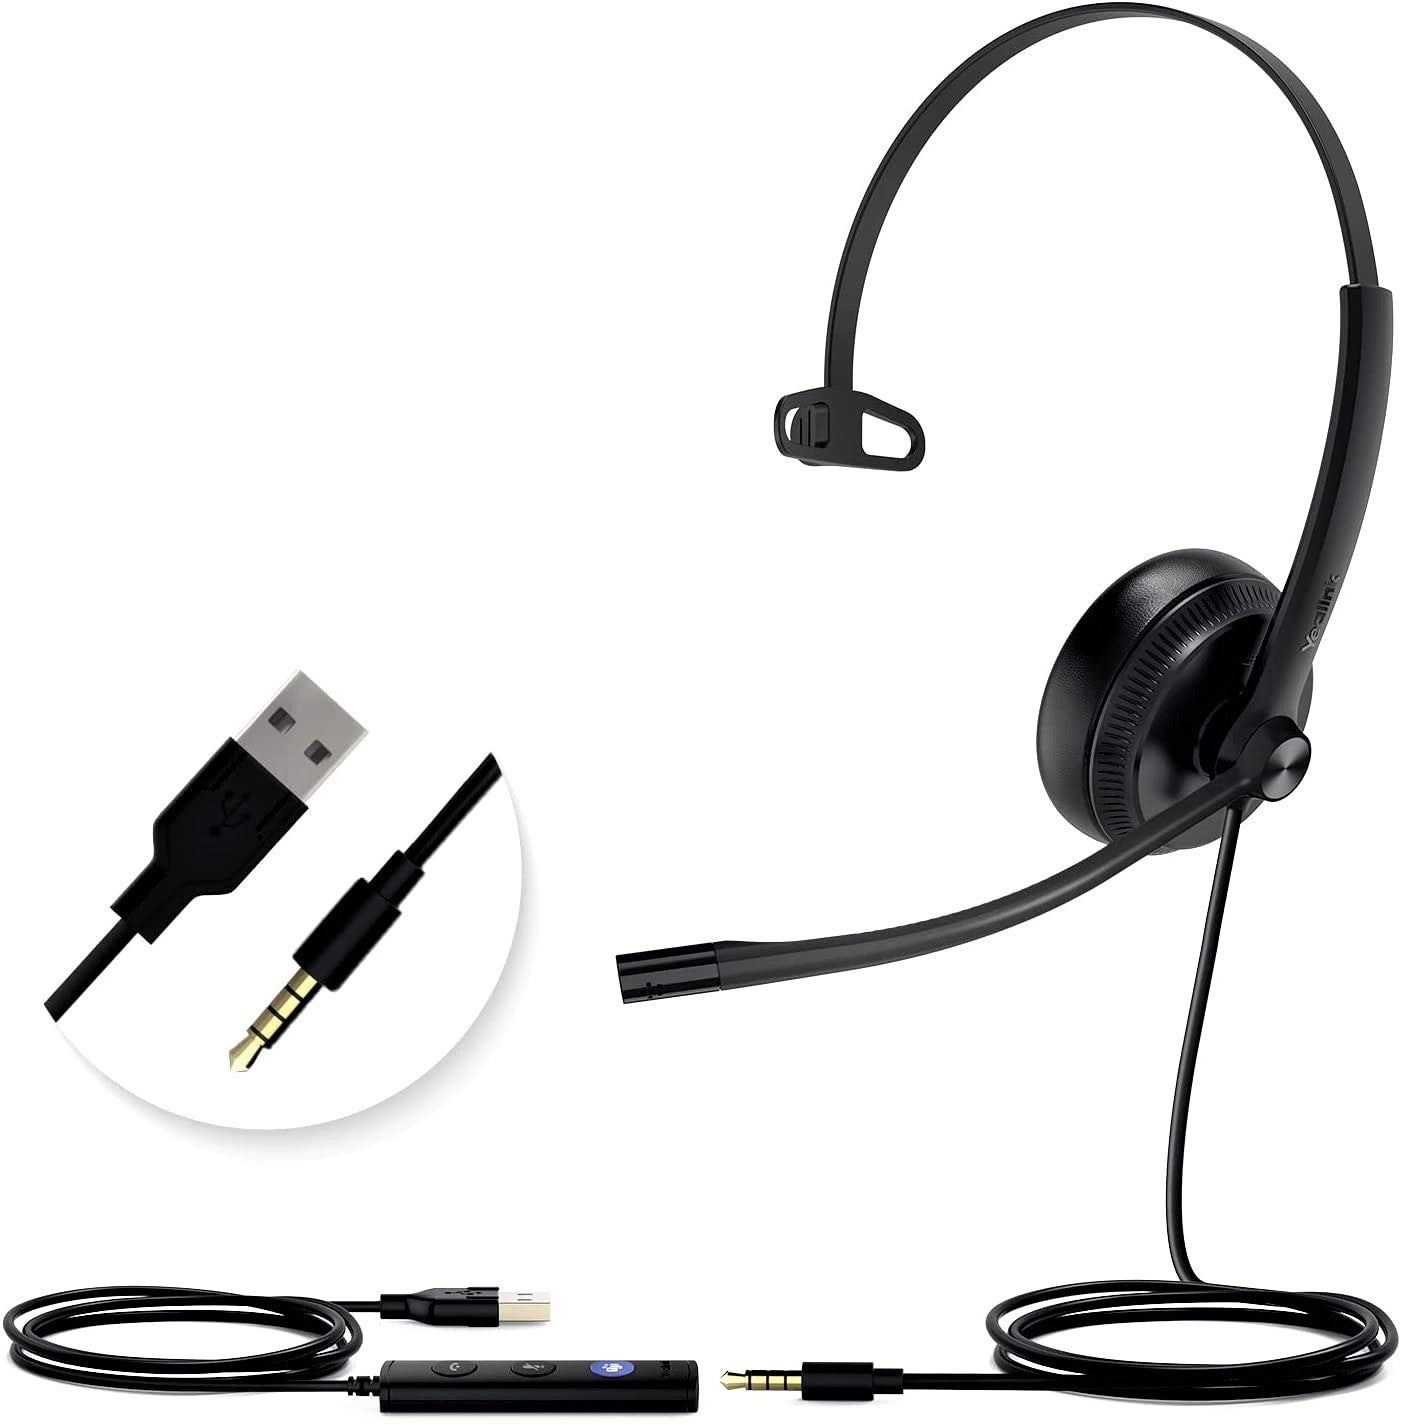 Yealink Headset with Microphone Teams Certified Headphones USB-A & 3.5mm Jack Wired UH34-SE Noise Cancelling with Mic for Computer PC Laptop Stereo for Microsoft Optimized